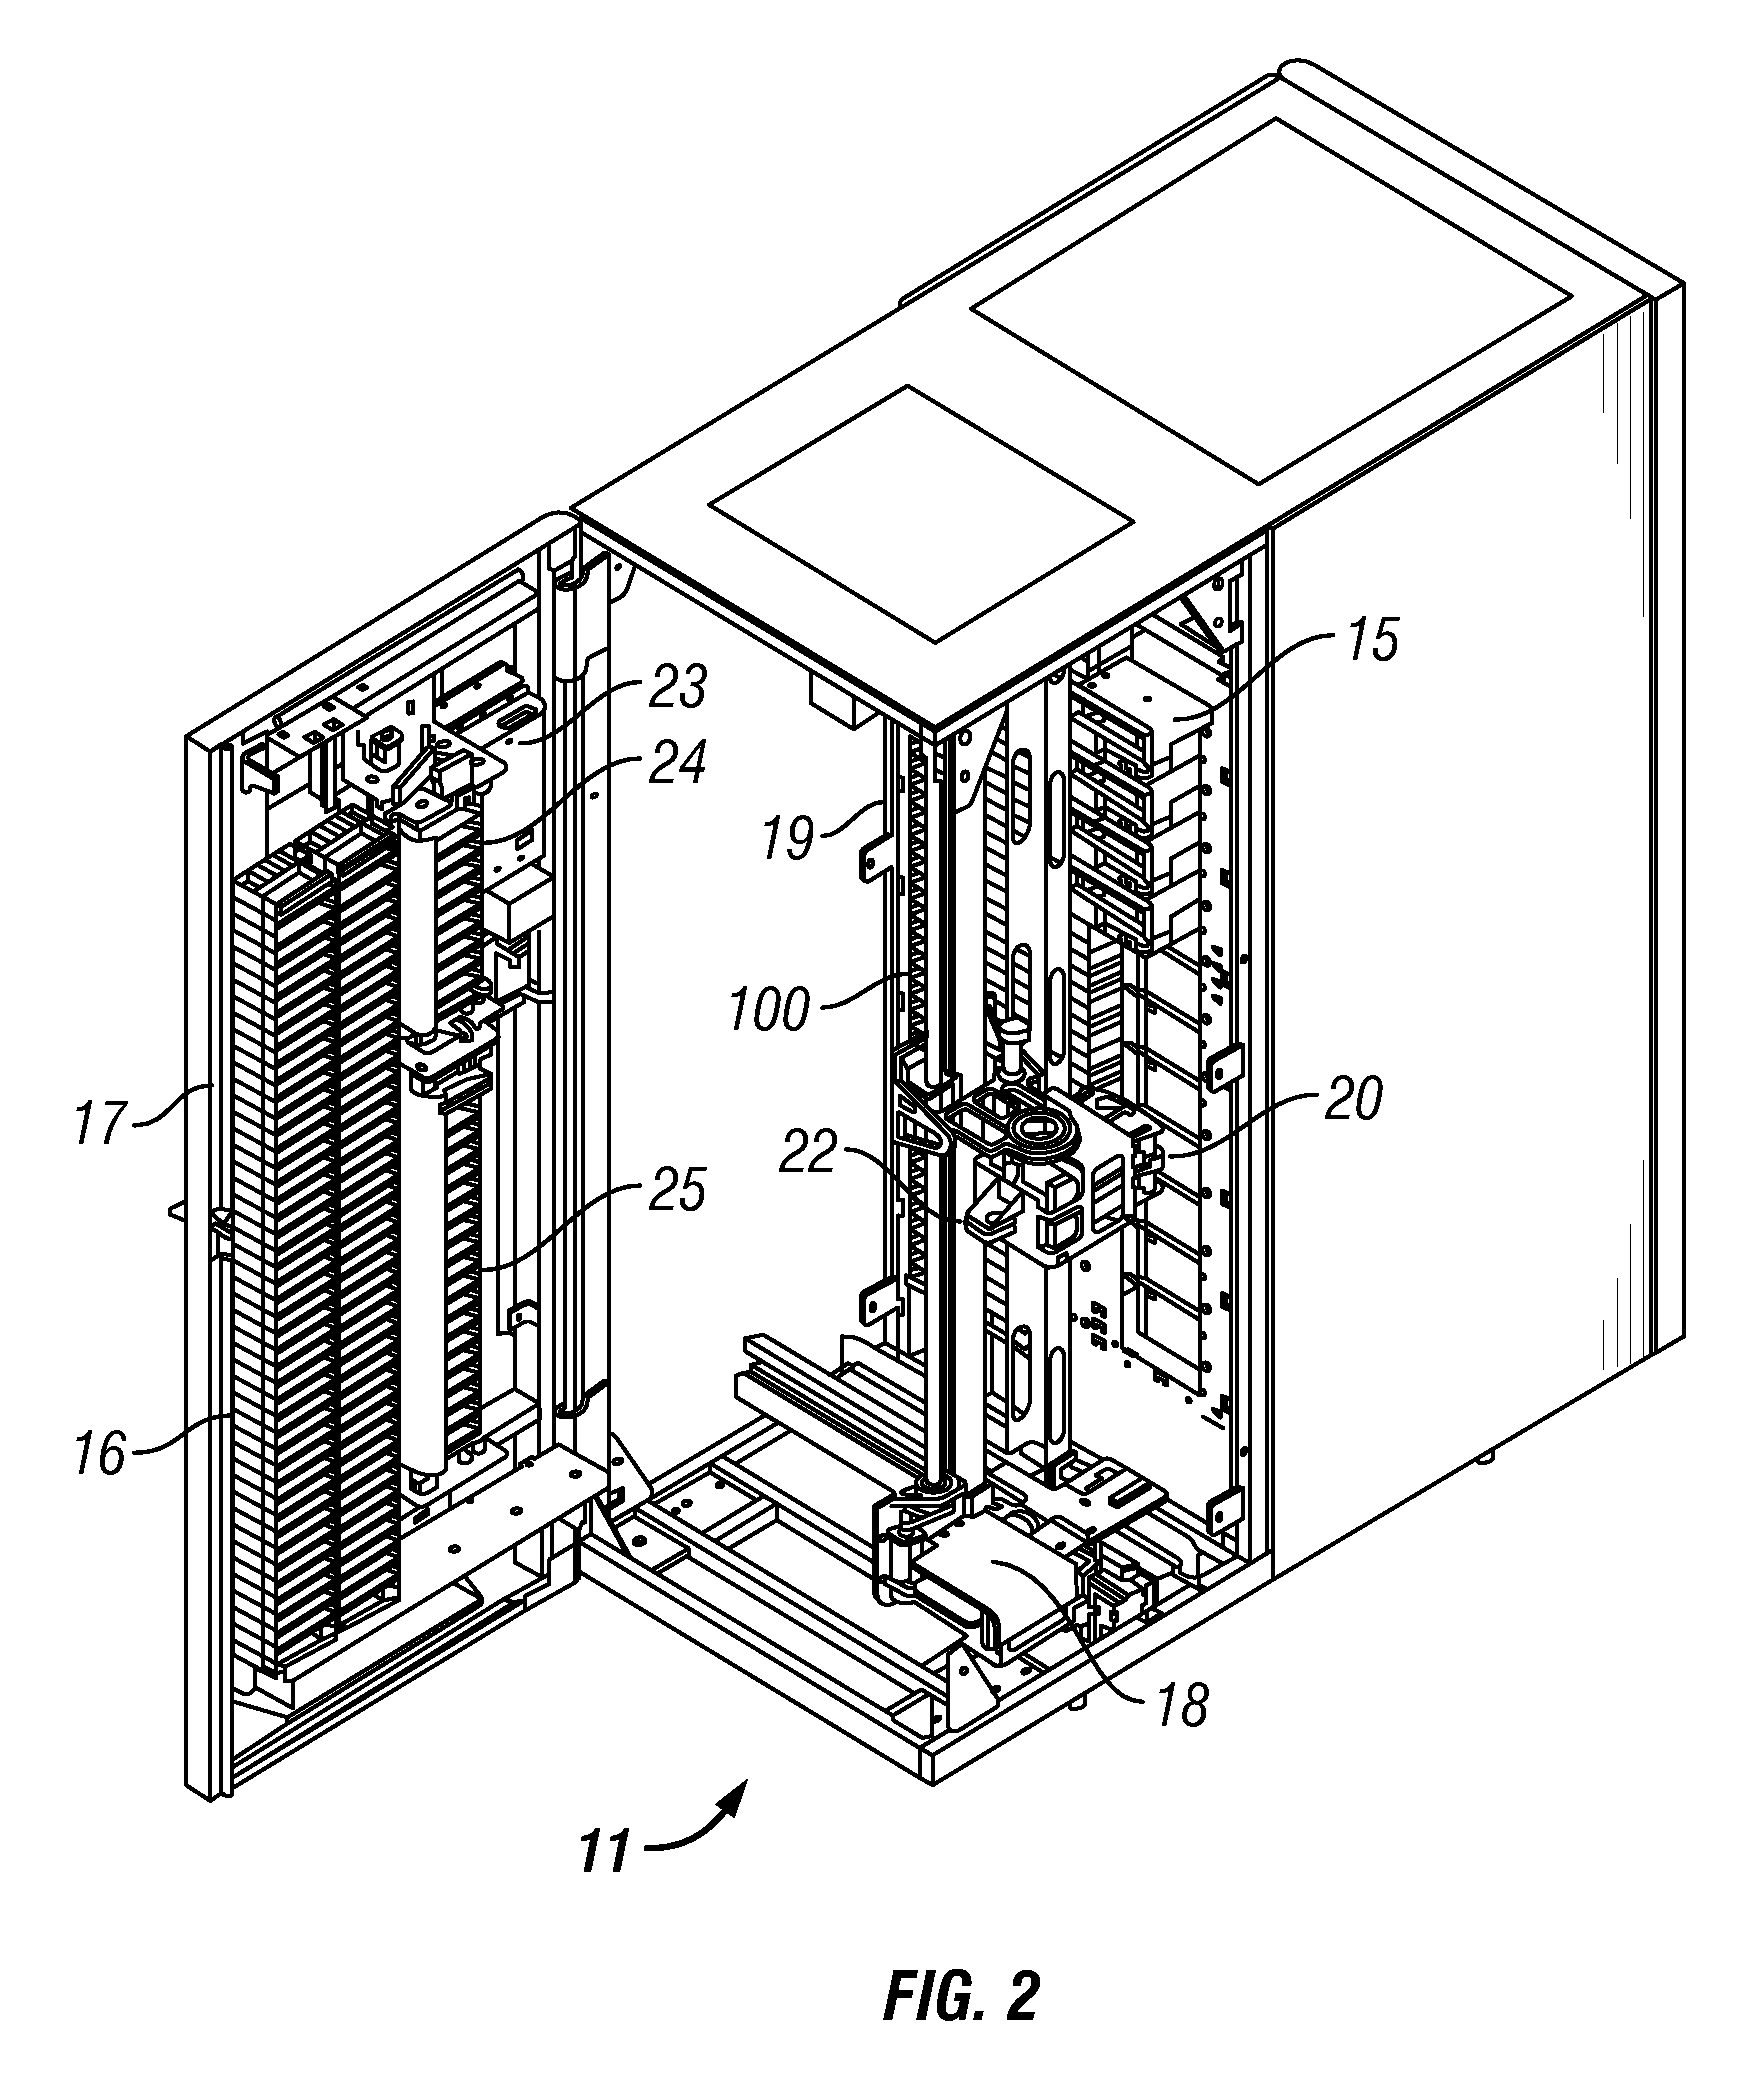 Placement of data storage cartridges in single cartridge slots and in multi-cartridge deep slot cells of an automated data storage library